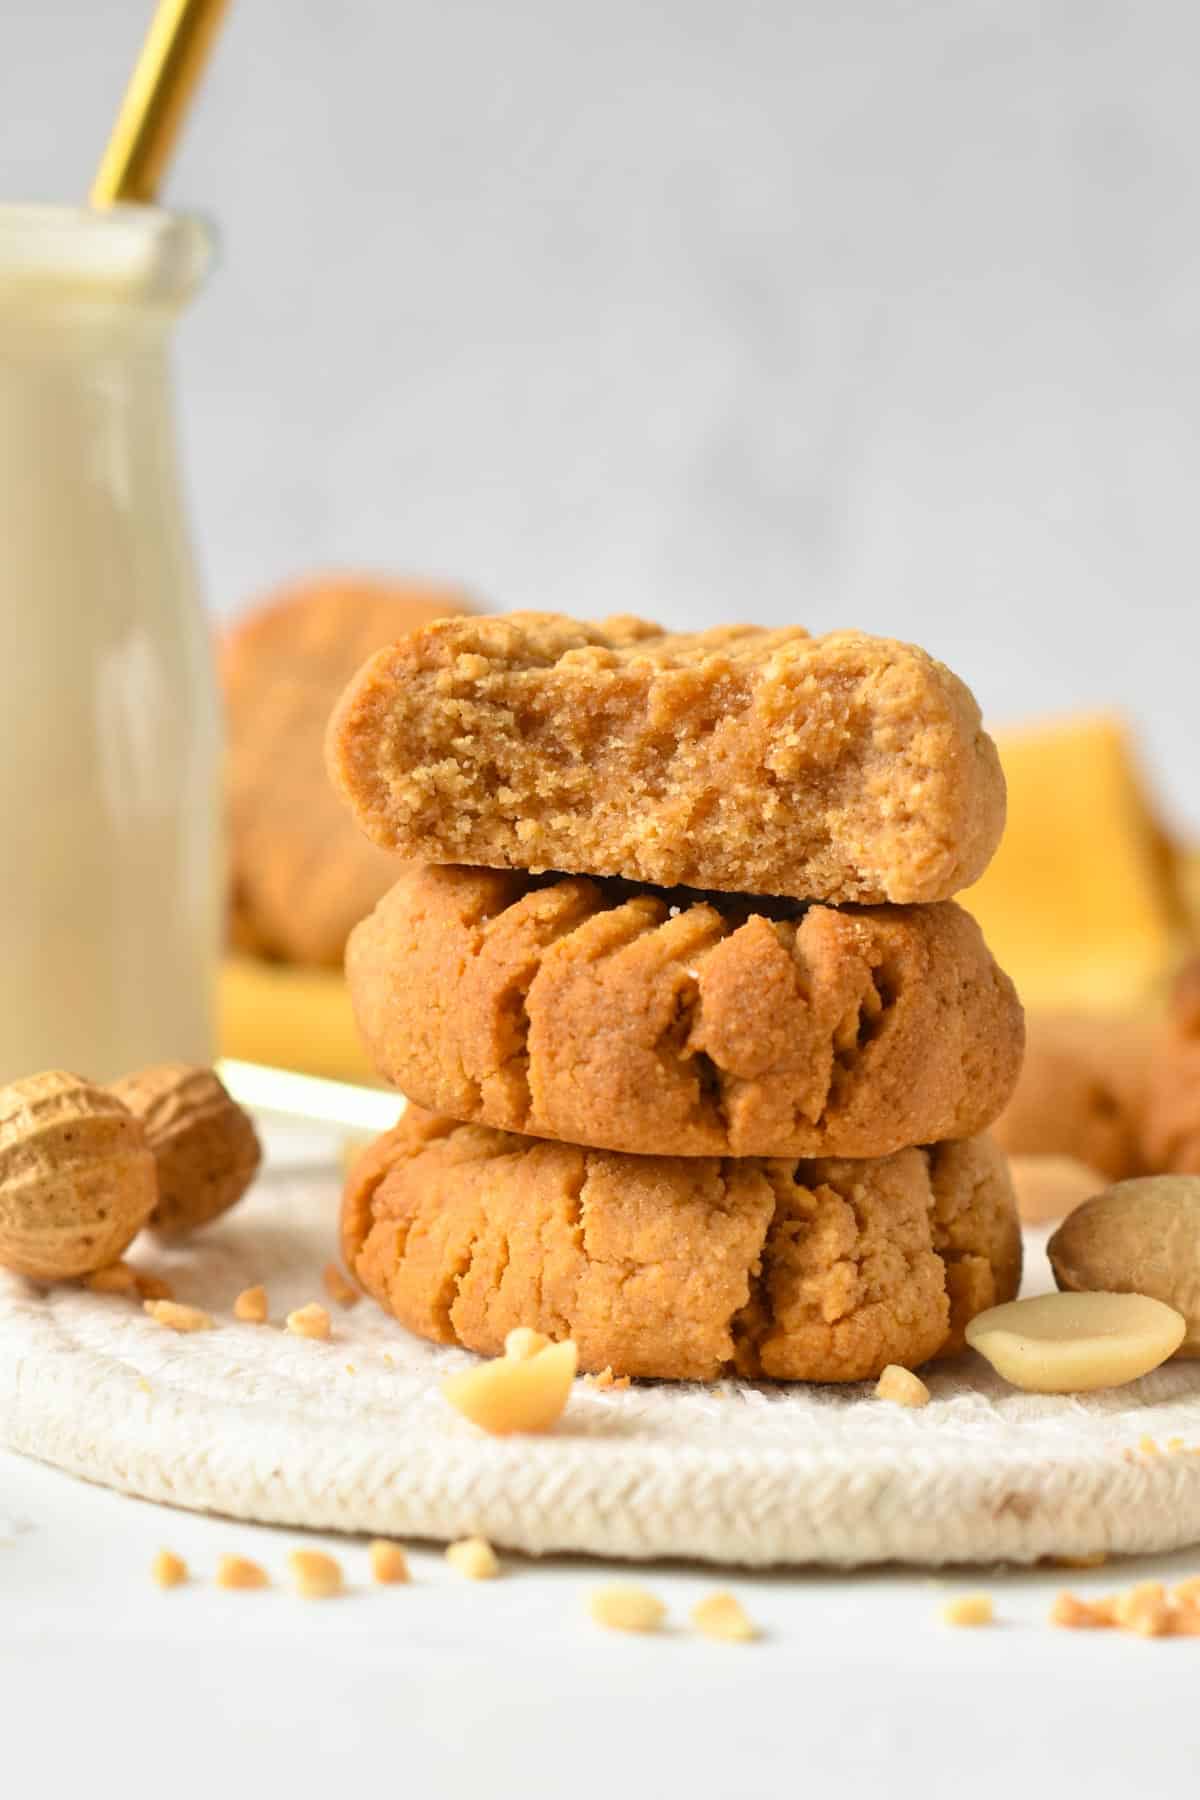 A stack of three peanut butter cookies with one cookie cut in half showing the crunchy texture inside.